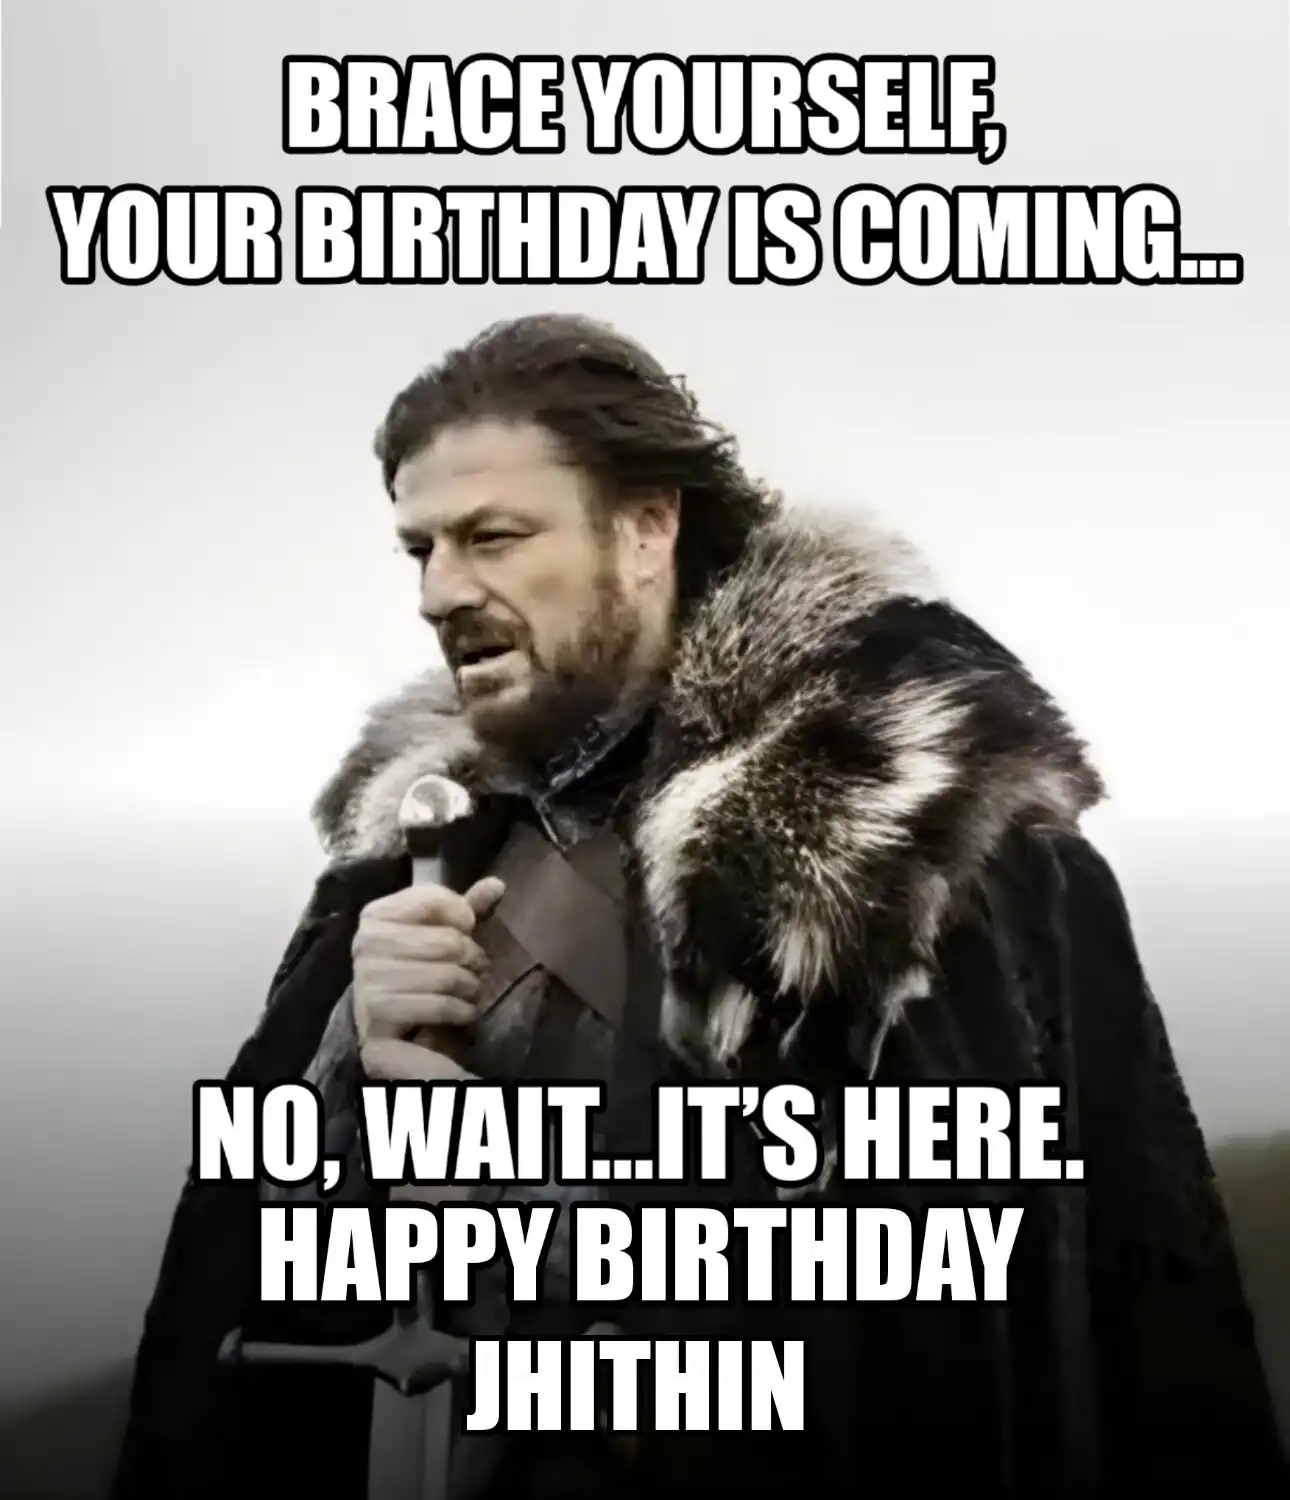 Happy Birthday Jhithin Brace Yourself Your Birthday Is Coming Meme